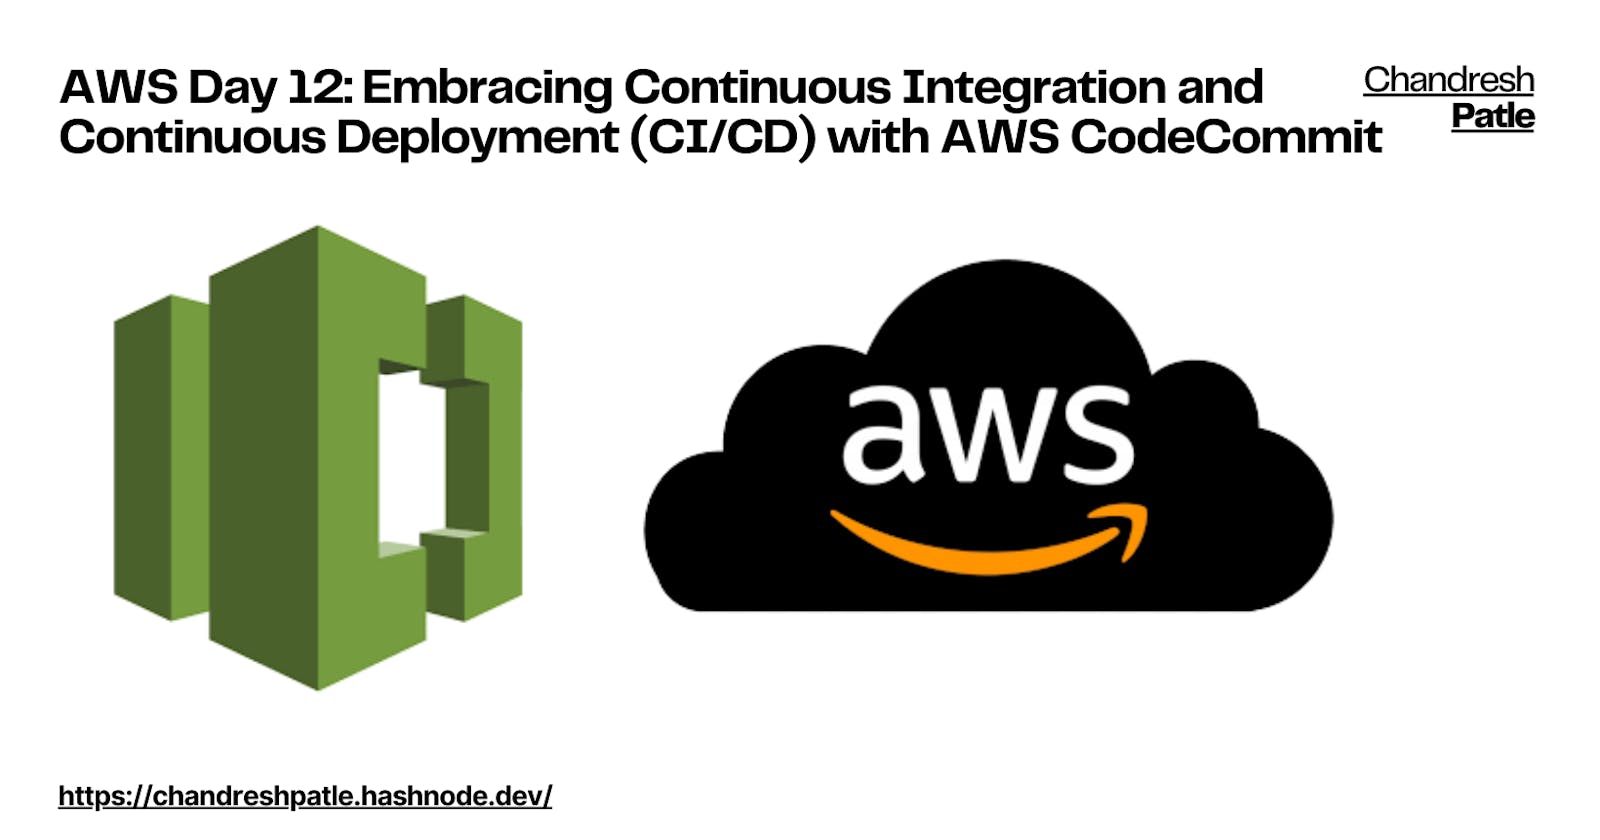 AWS Day 12: Embracing Continuous Integration and Continuous Deployment (CI/CD) with AWS CodeCommit